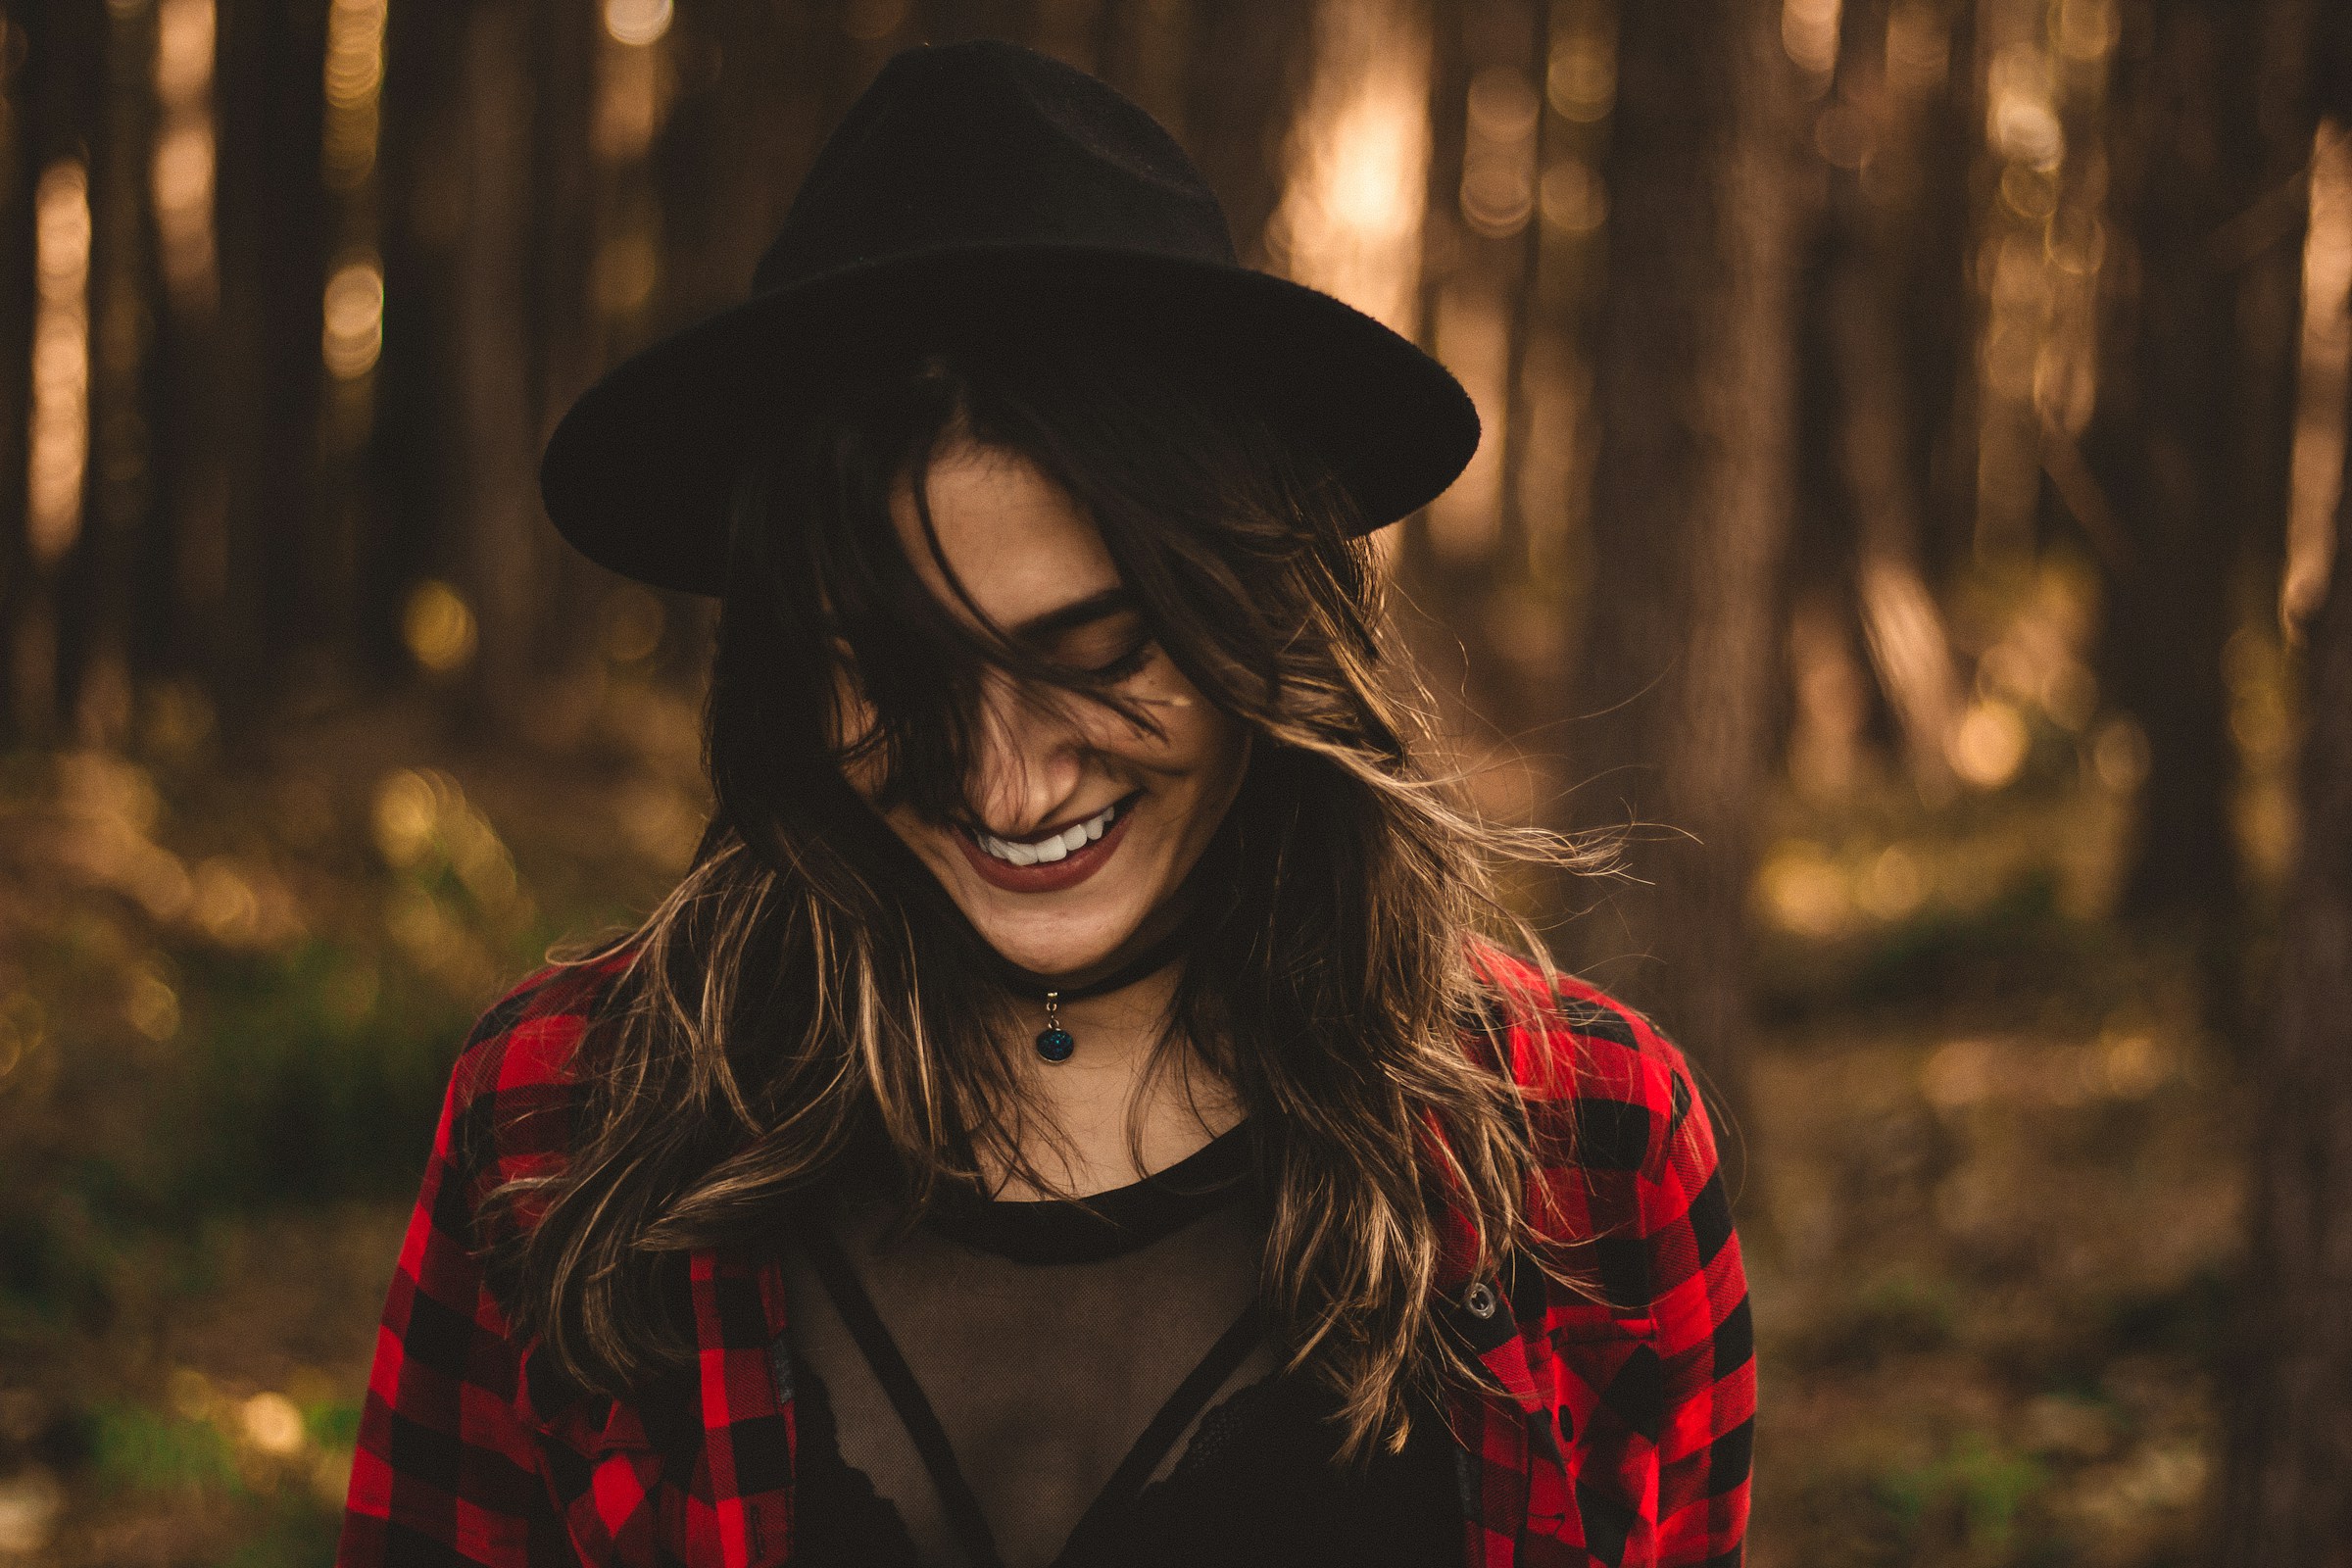 A woman smiling in the forest | Source: Unsplash